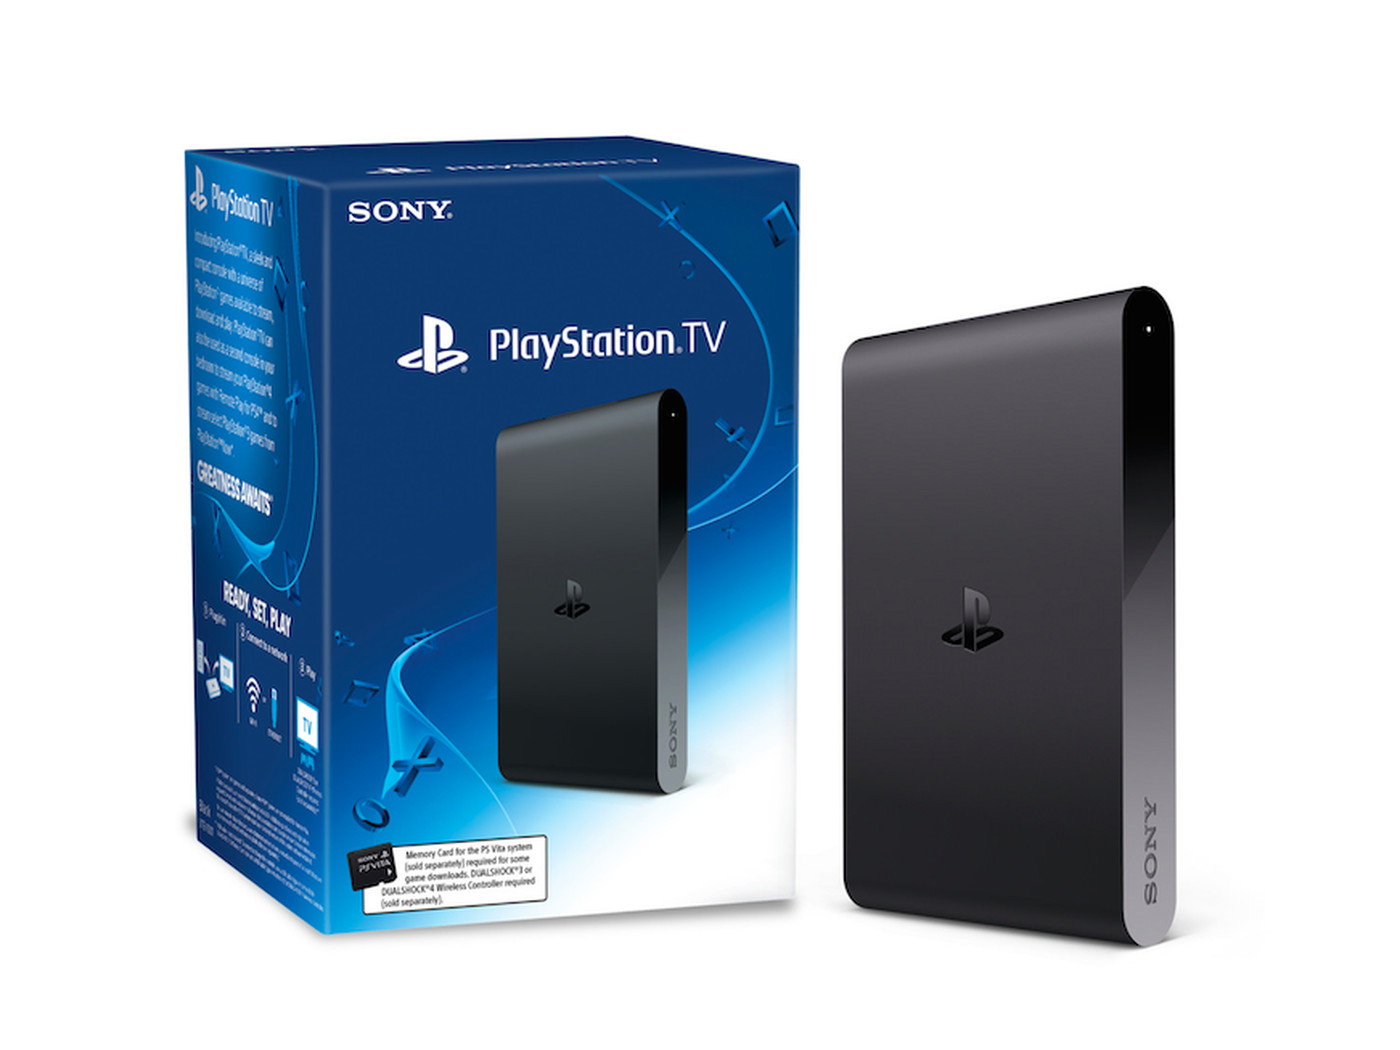 Sony's PlayStation TV coming to US on October 14th - The Verge